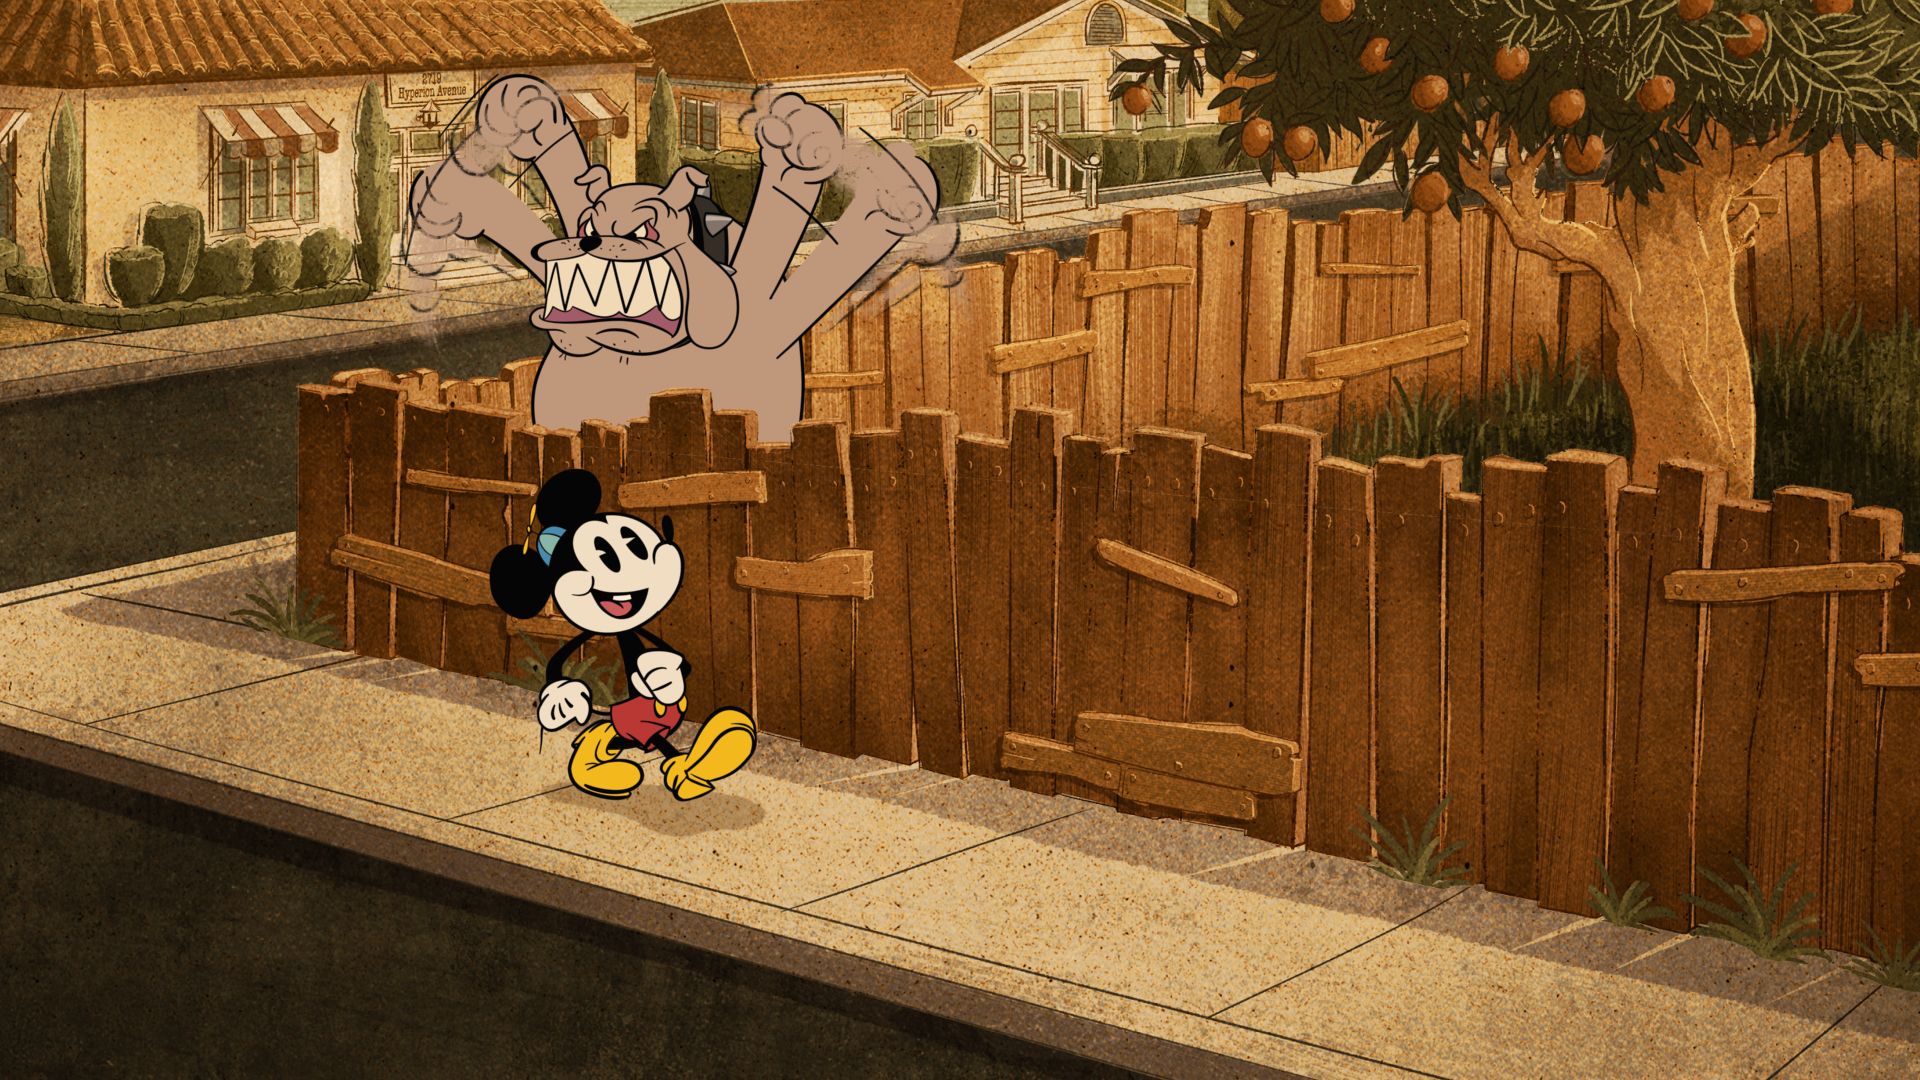 Amazing Images From The Wonderful World of Mickey Mouse [EXCLUSIVE]